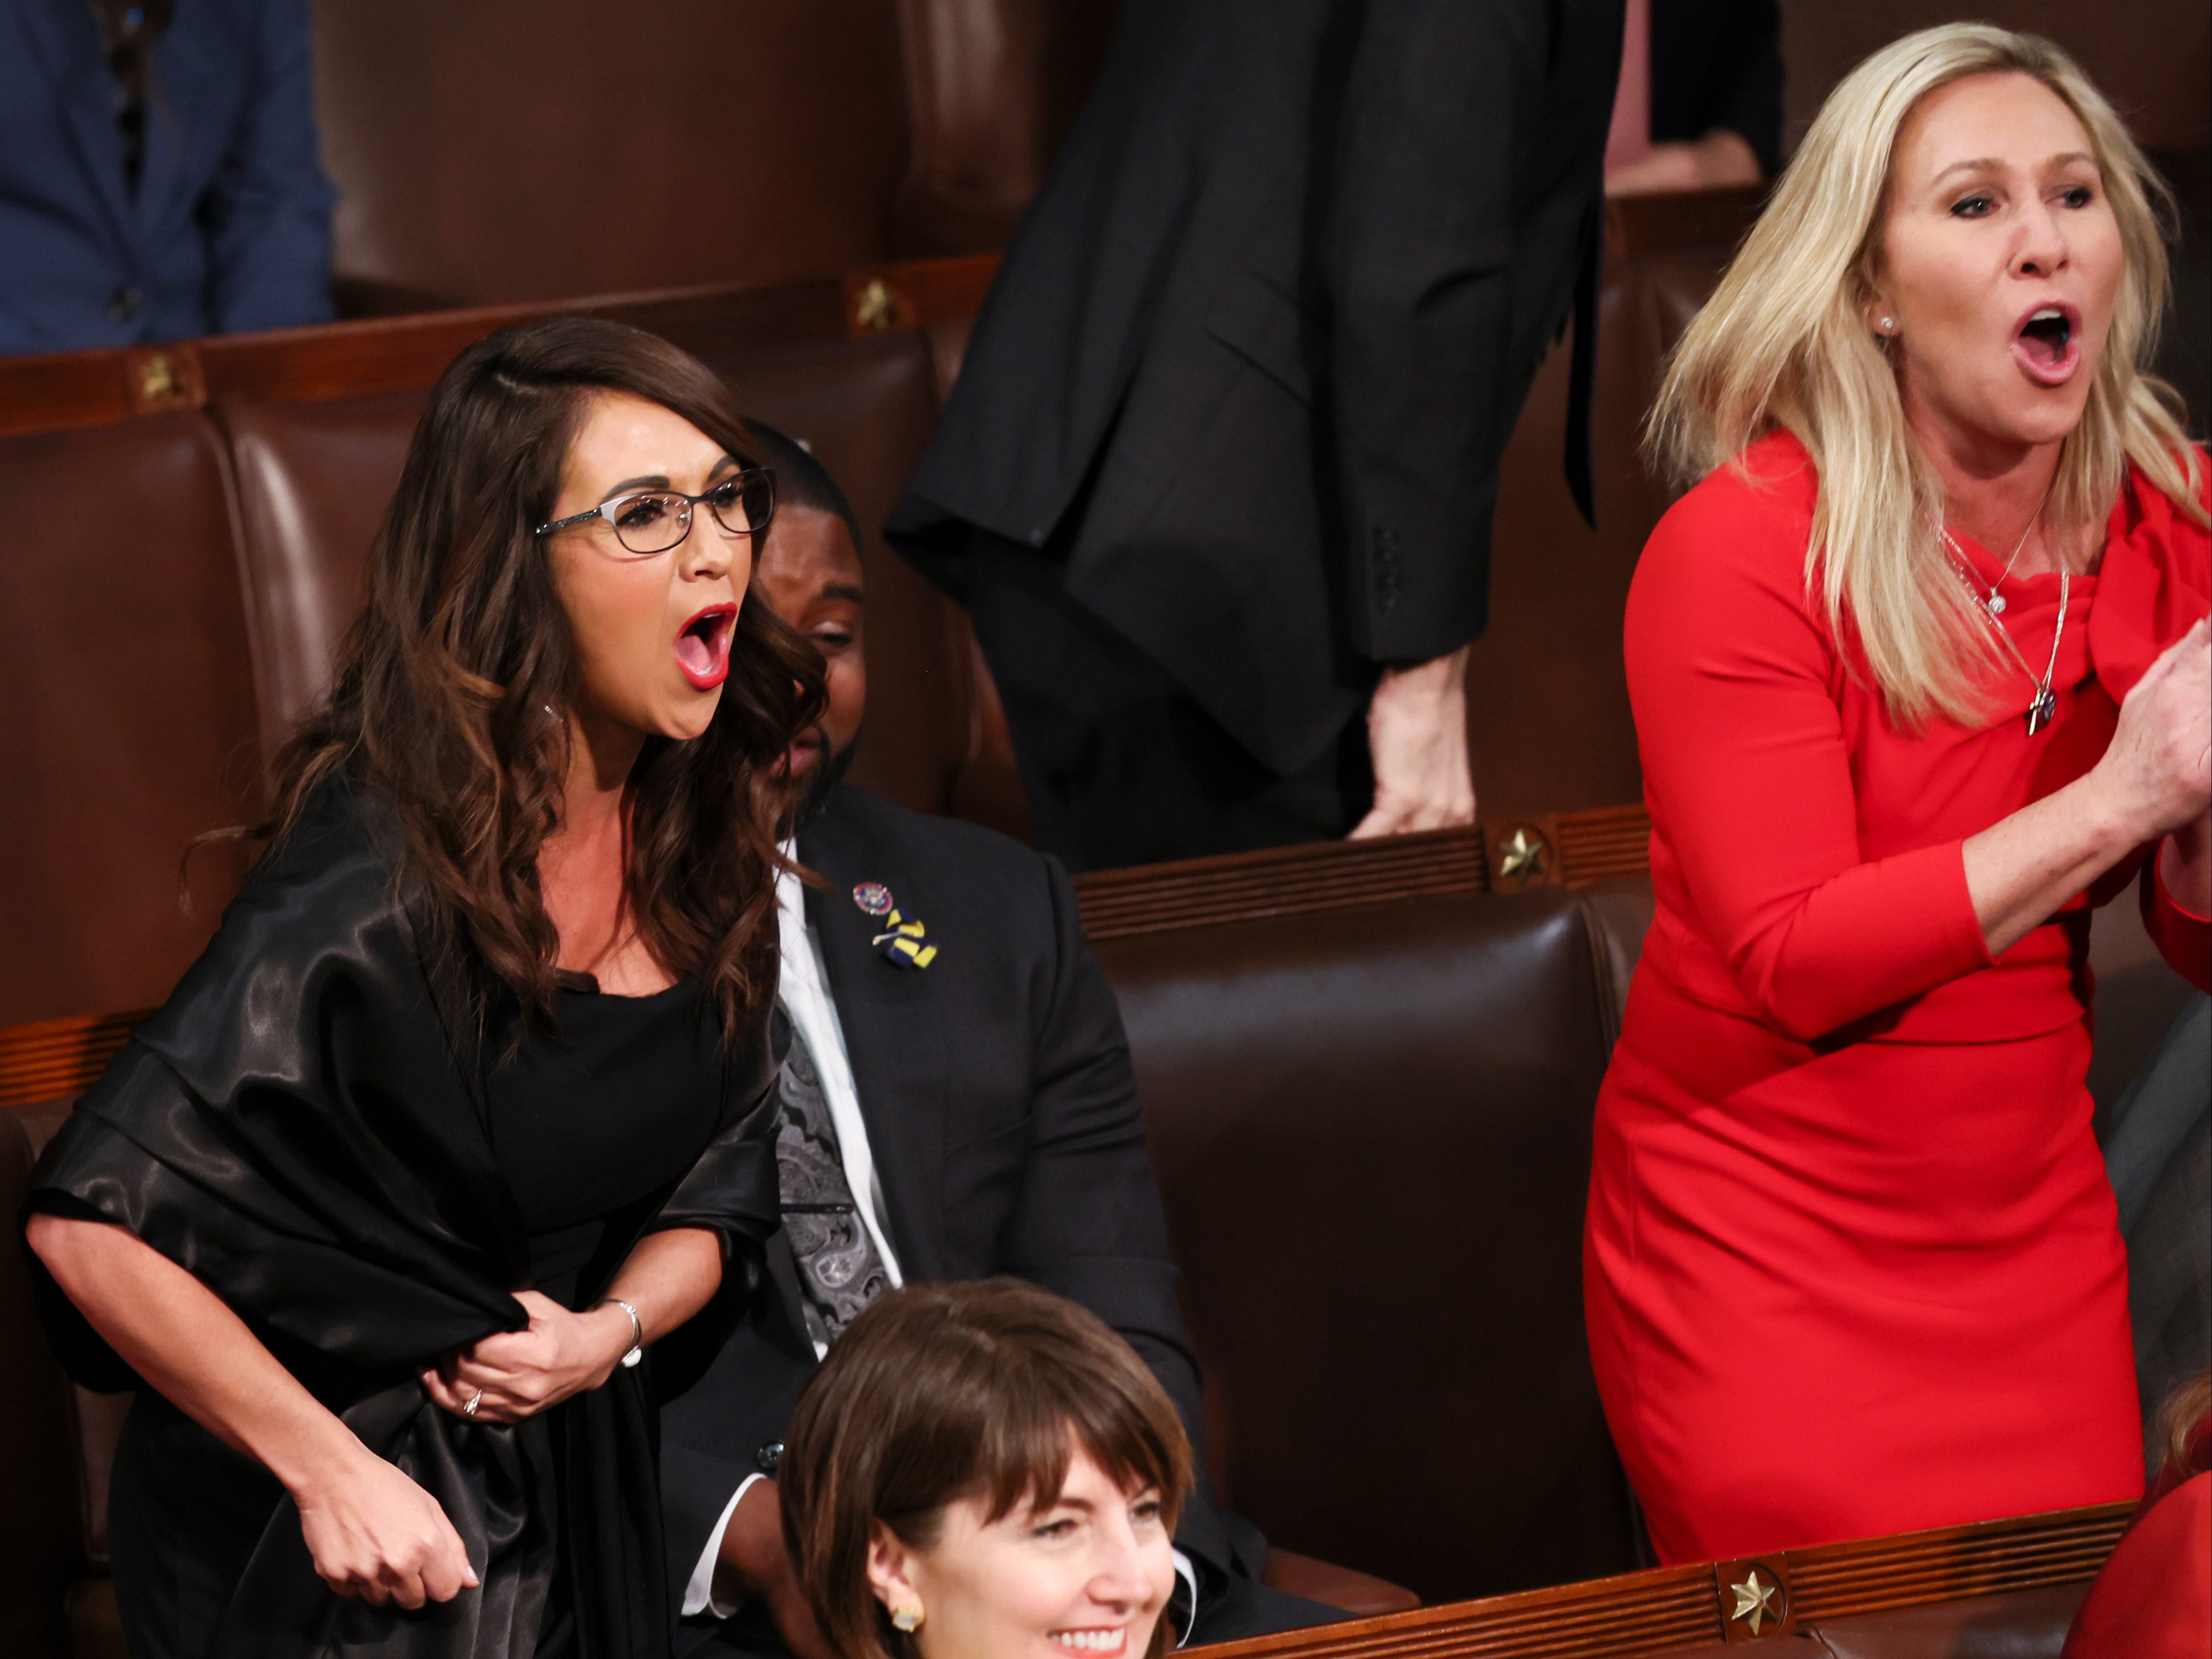 Lauren Boebert and Marjorie Taylor Greene scream ‘Build the Wall’ as Joe Biden delivers his State of the Union address in March 2022